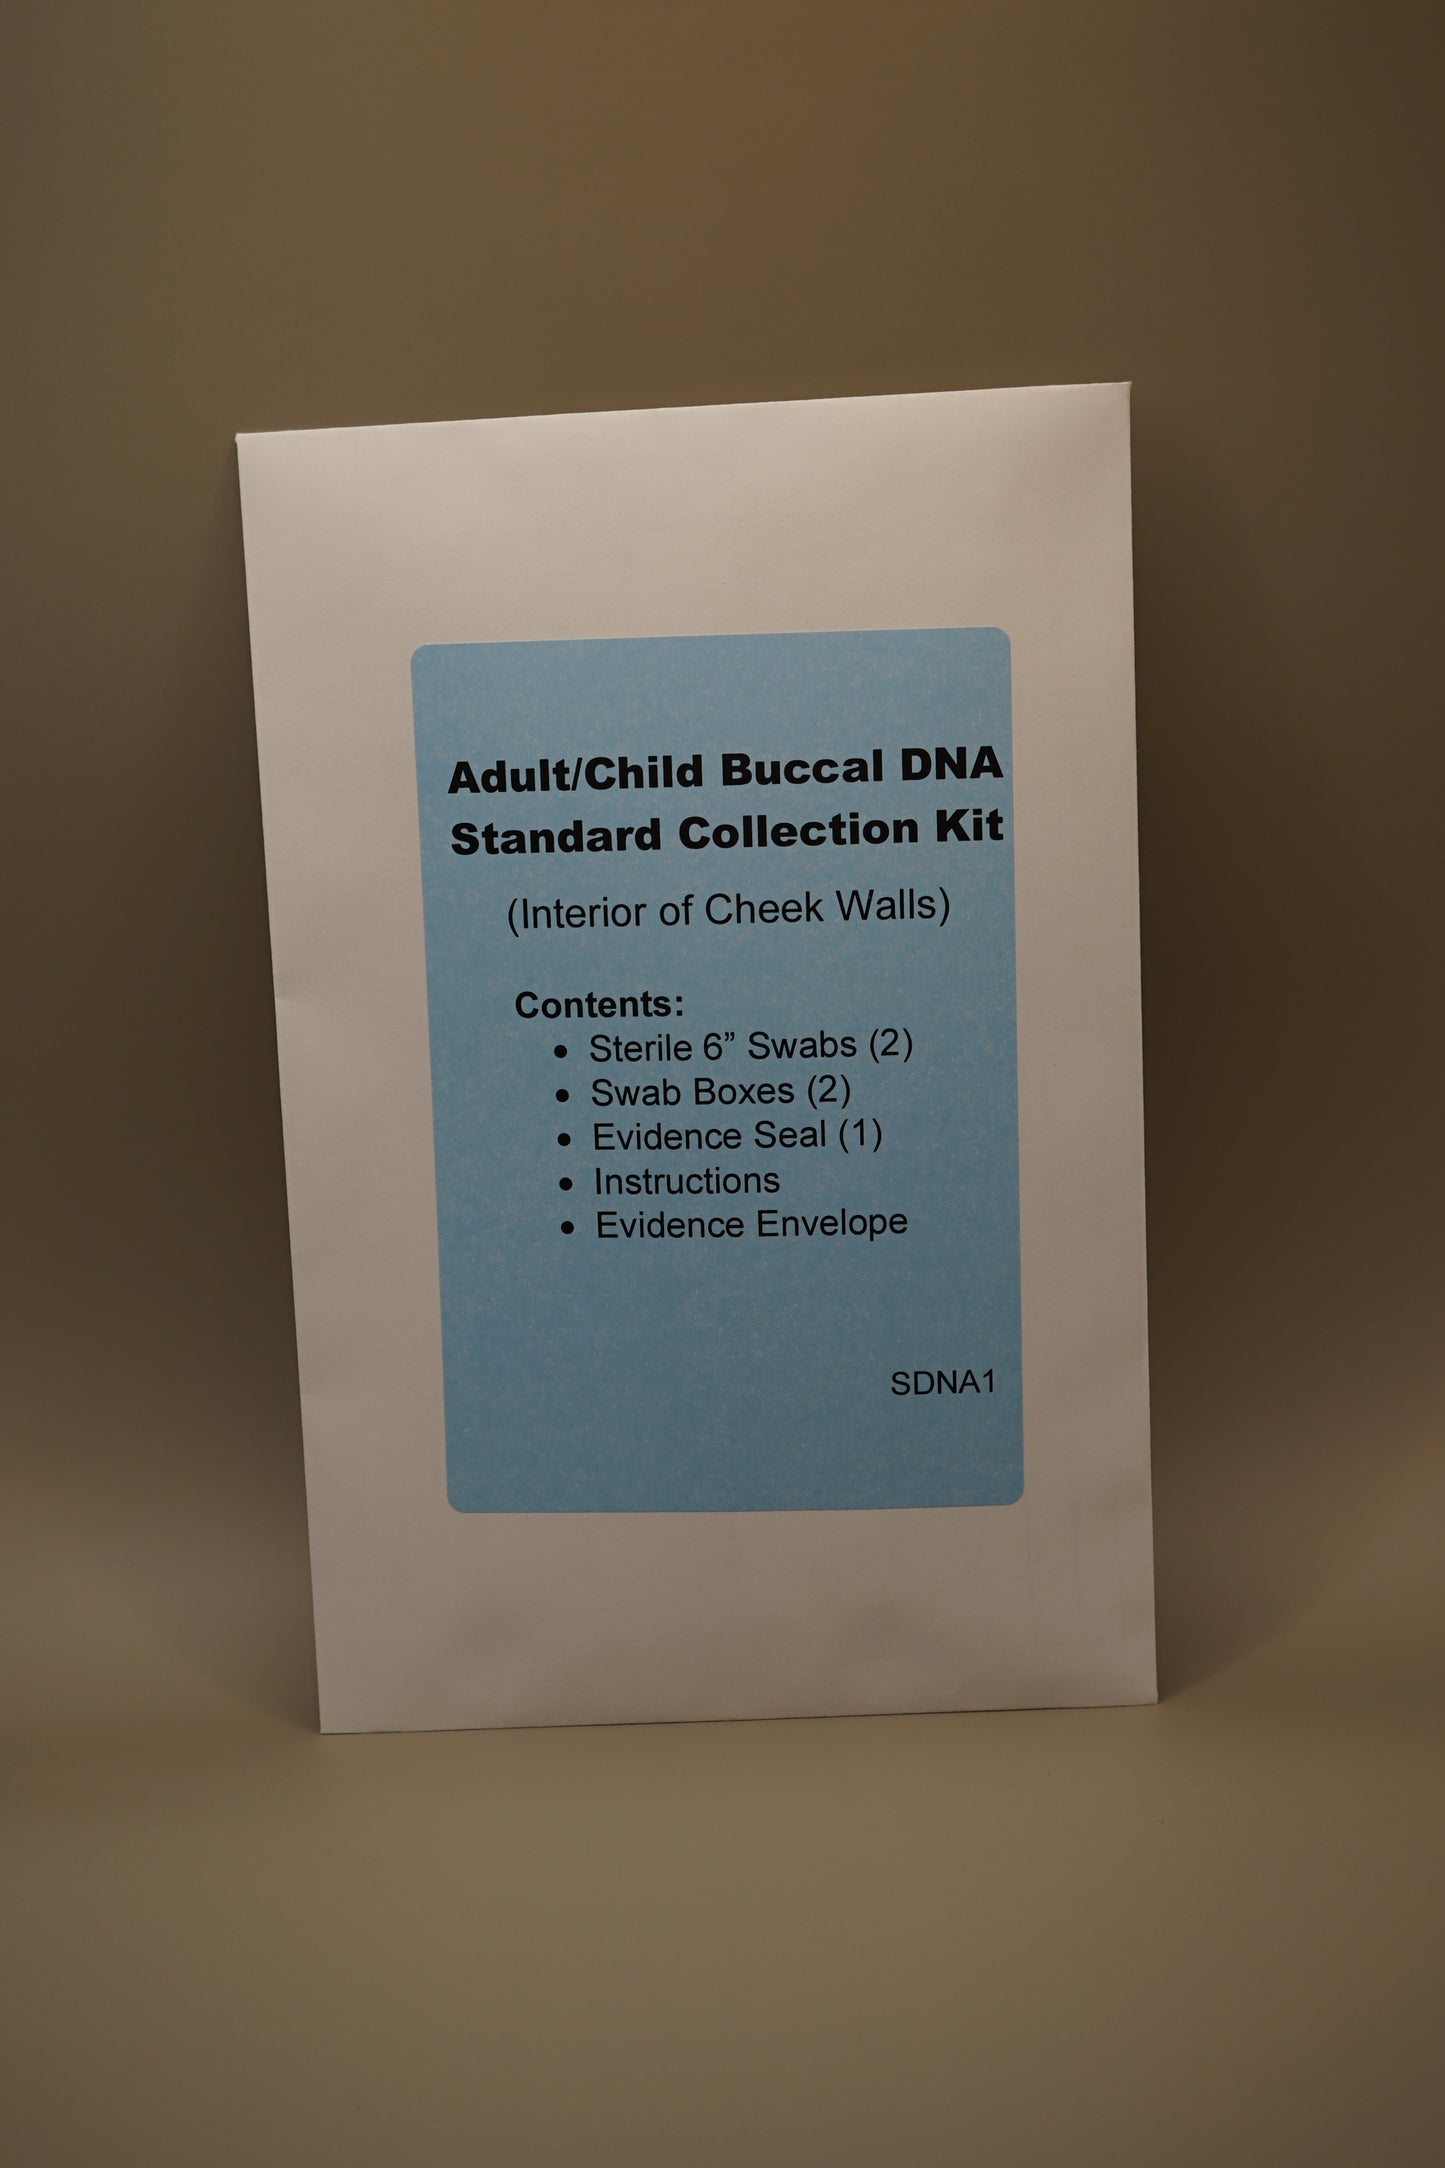 Adult/Child Buccal DNA Standard Collection Kit